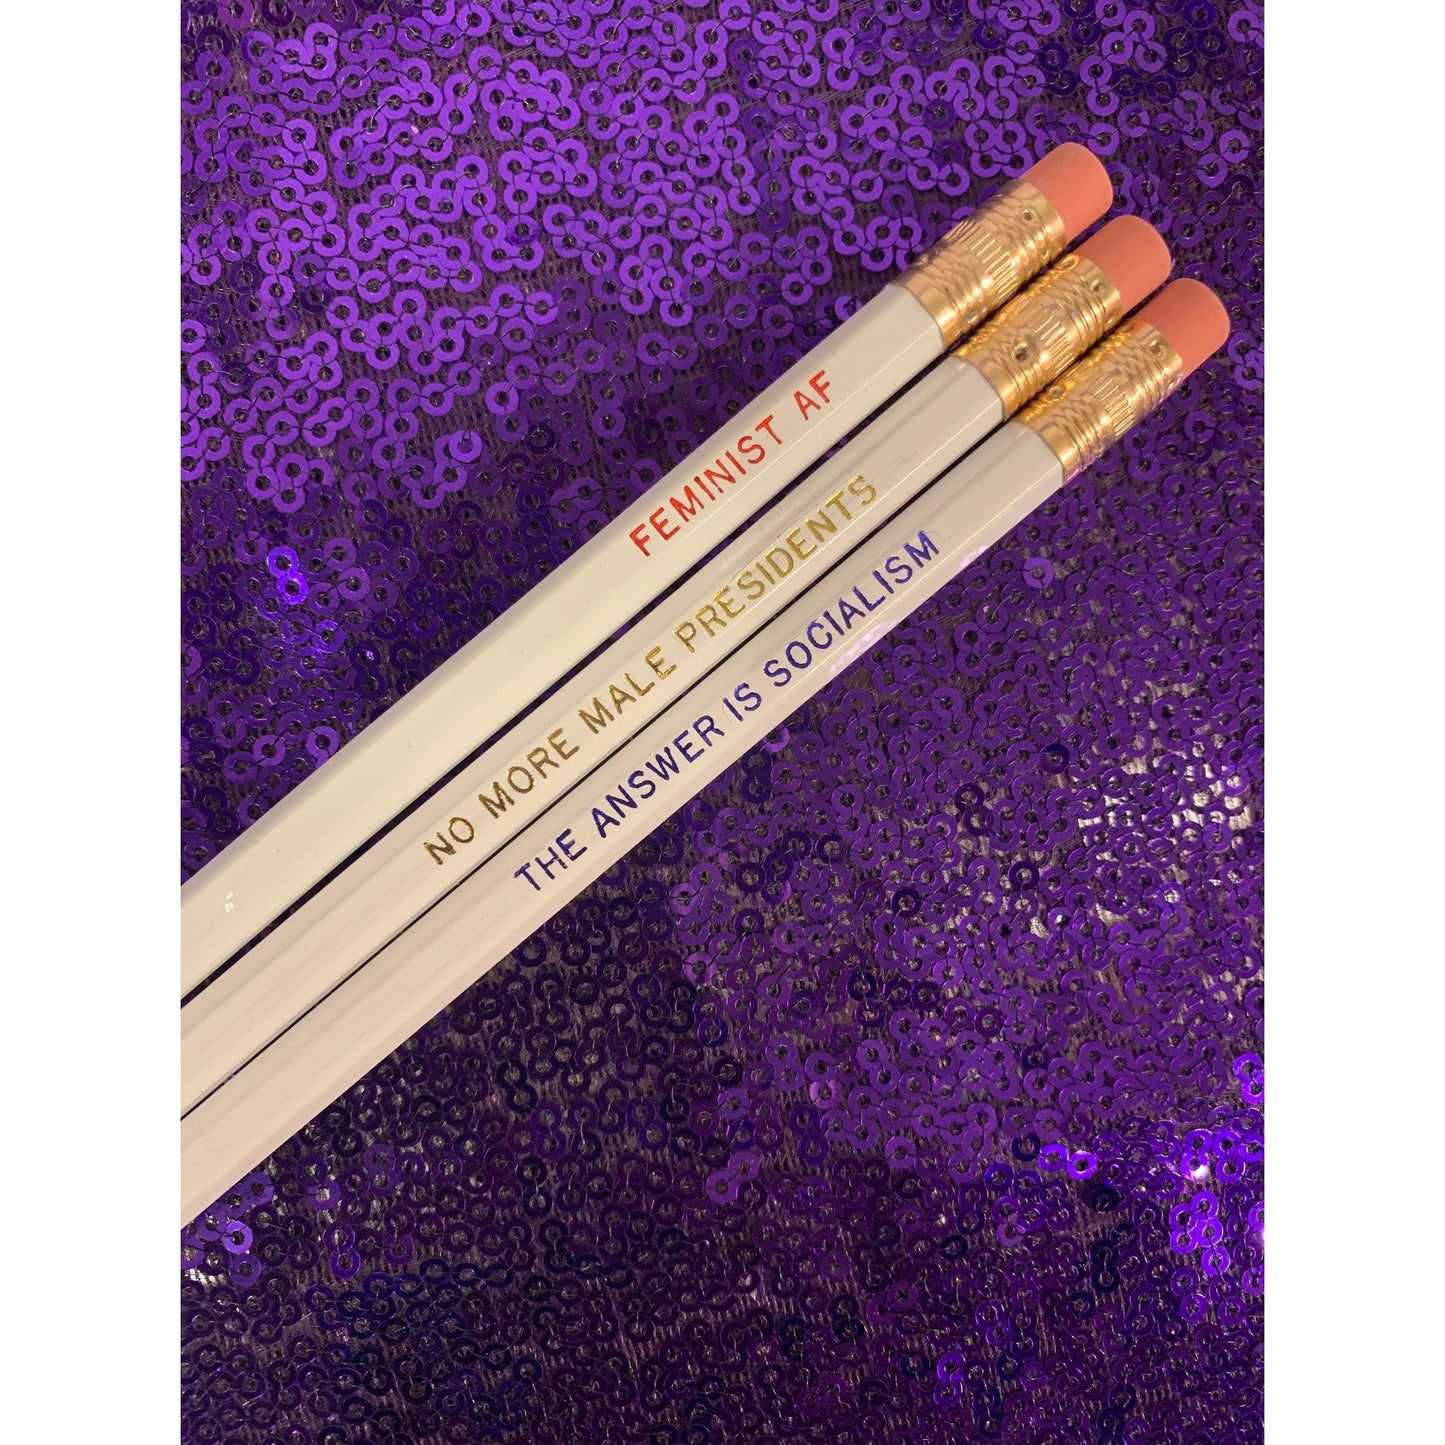 Feminist + Socialist Red, White, and Blue Political Pencil Set of 3